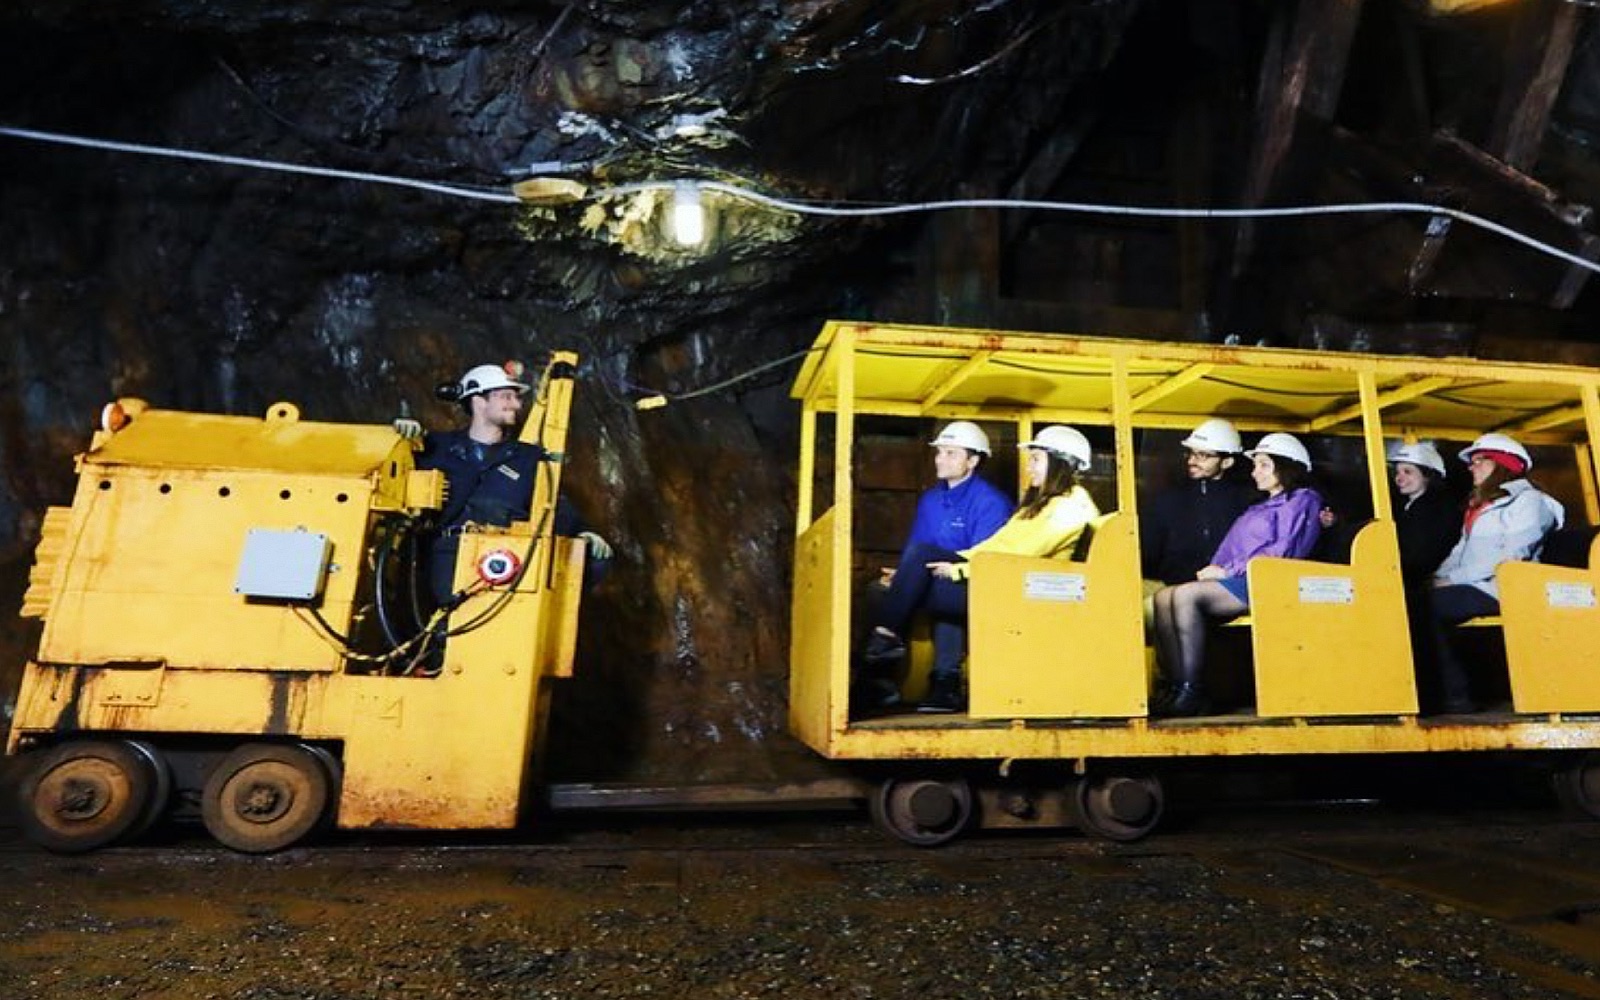 A group of visitors ride an underground train through a mine shaft